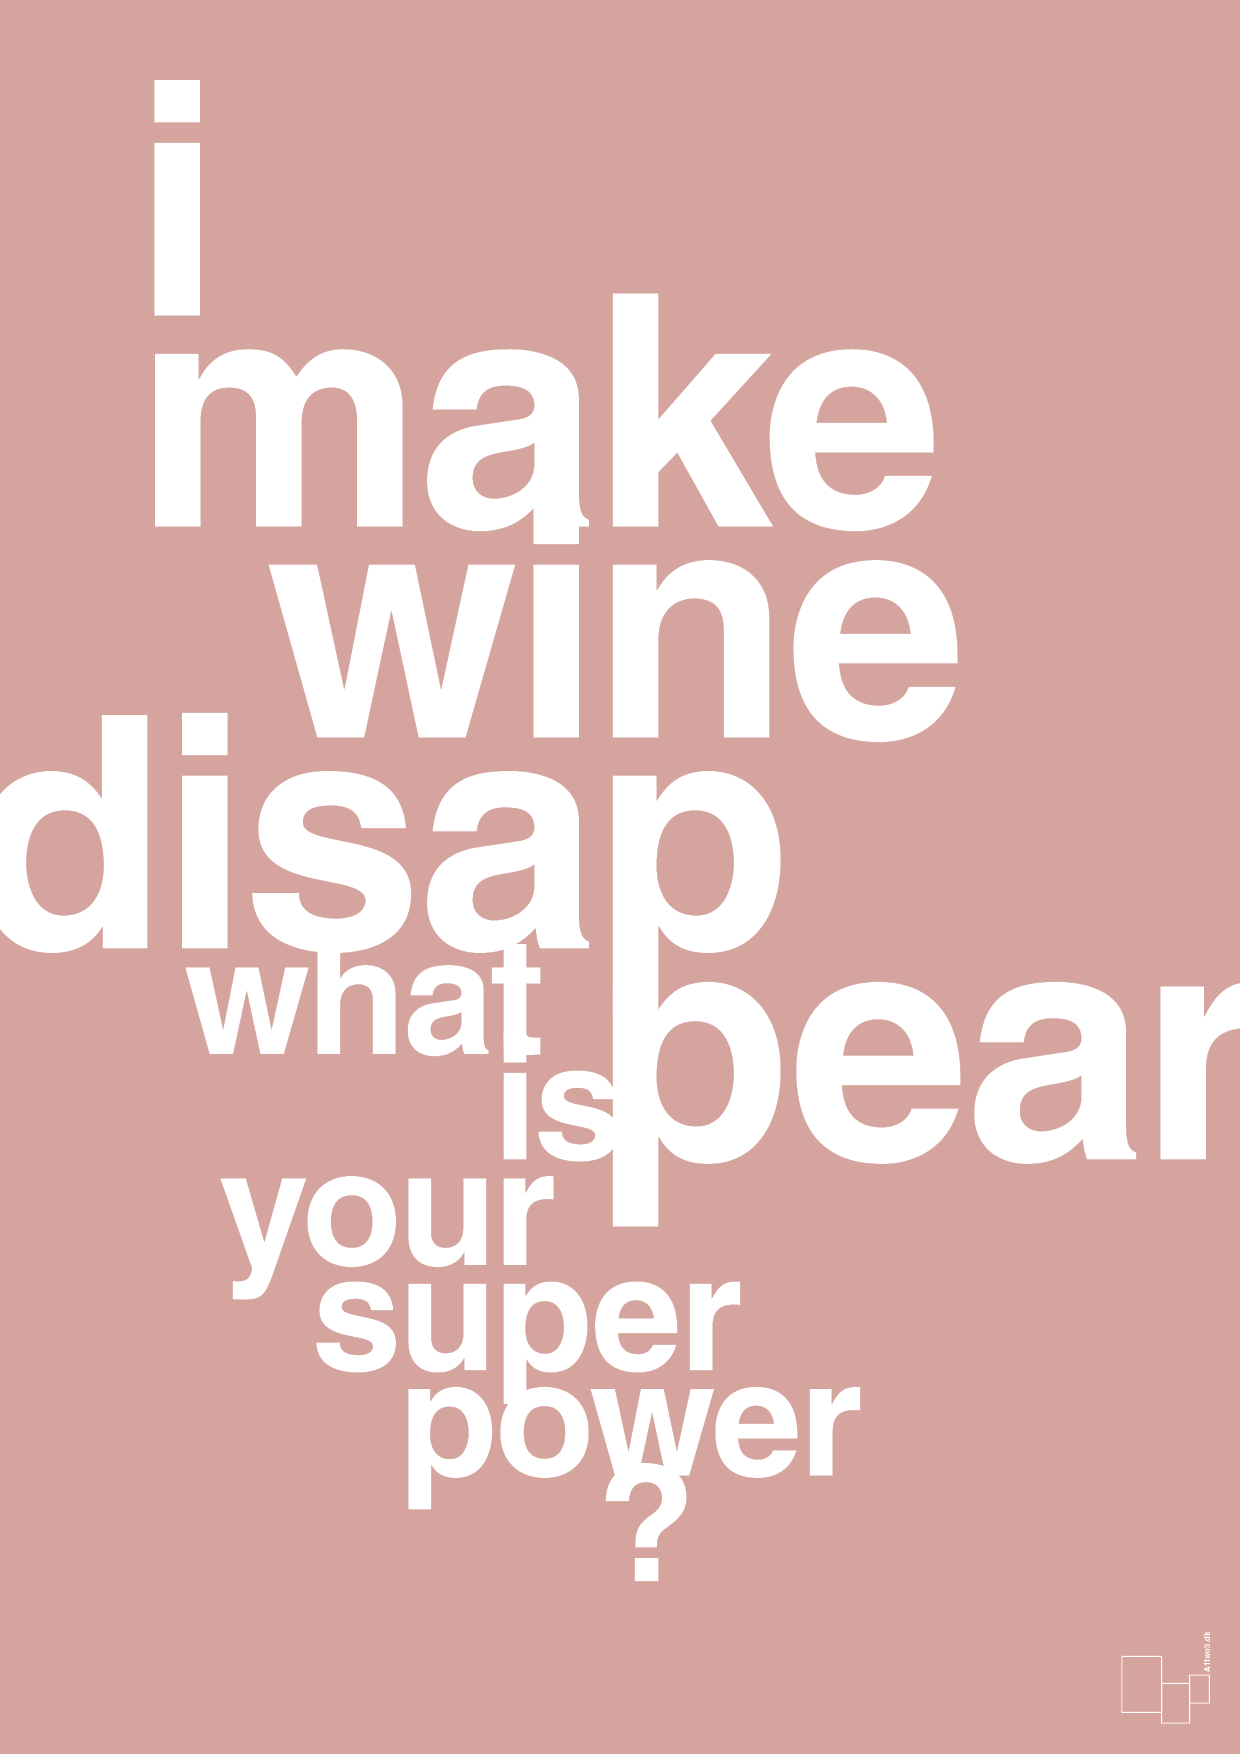 i make wine disappear what is your super power - Plakat med Mad & Drikke i Bubble Shell